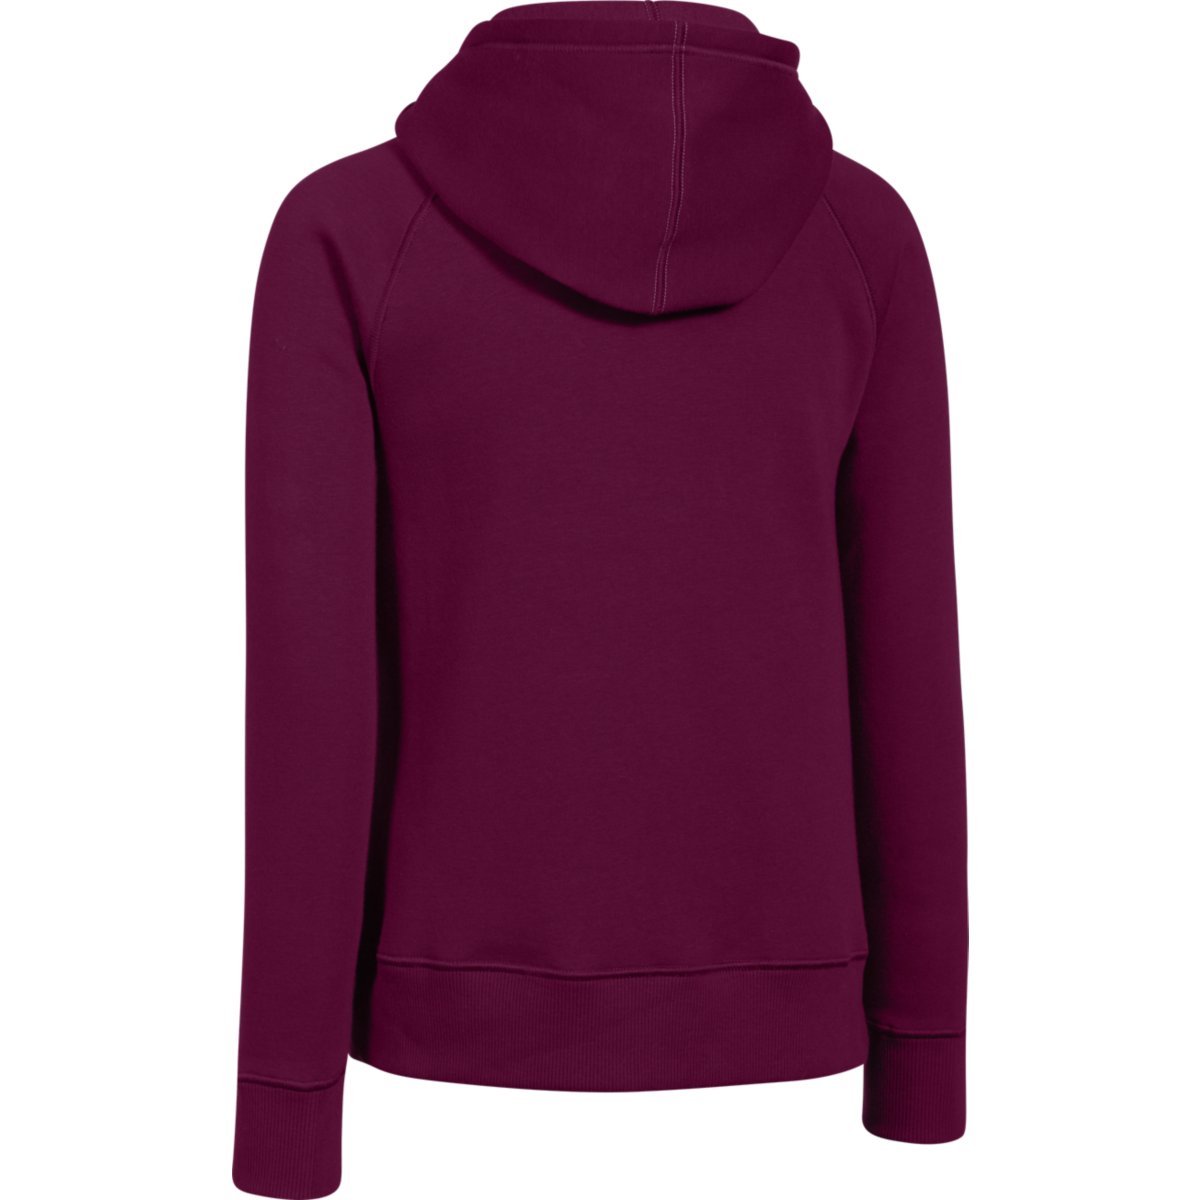 Under Armour Girls' Rival Cotton Solid Hoodie